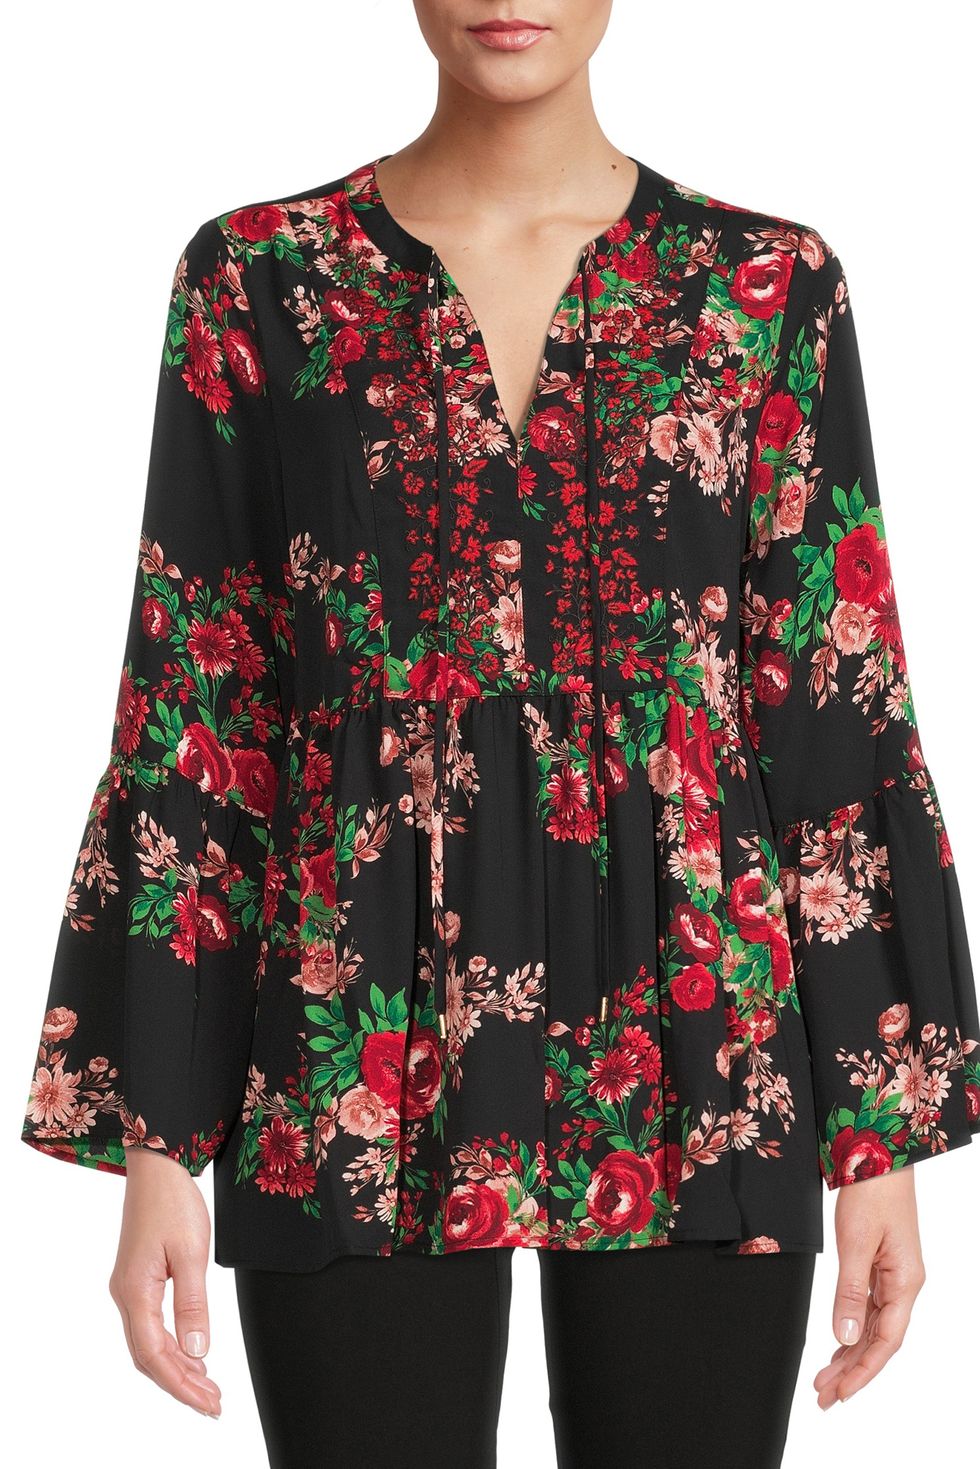 The Pioneer Woman Embroidered Flounce Sleeve Top